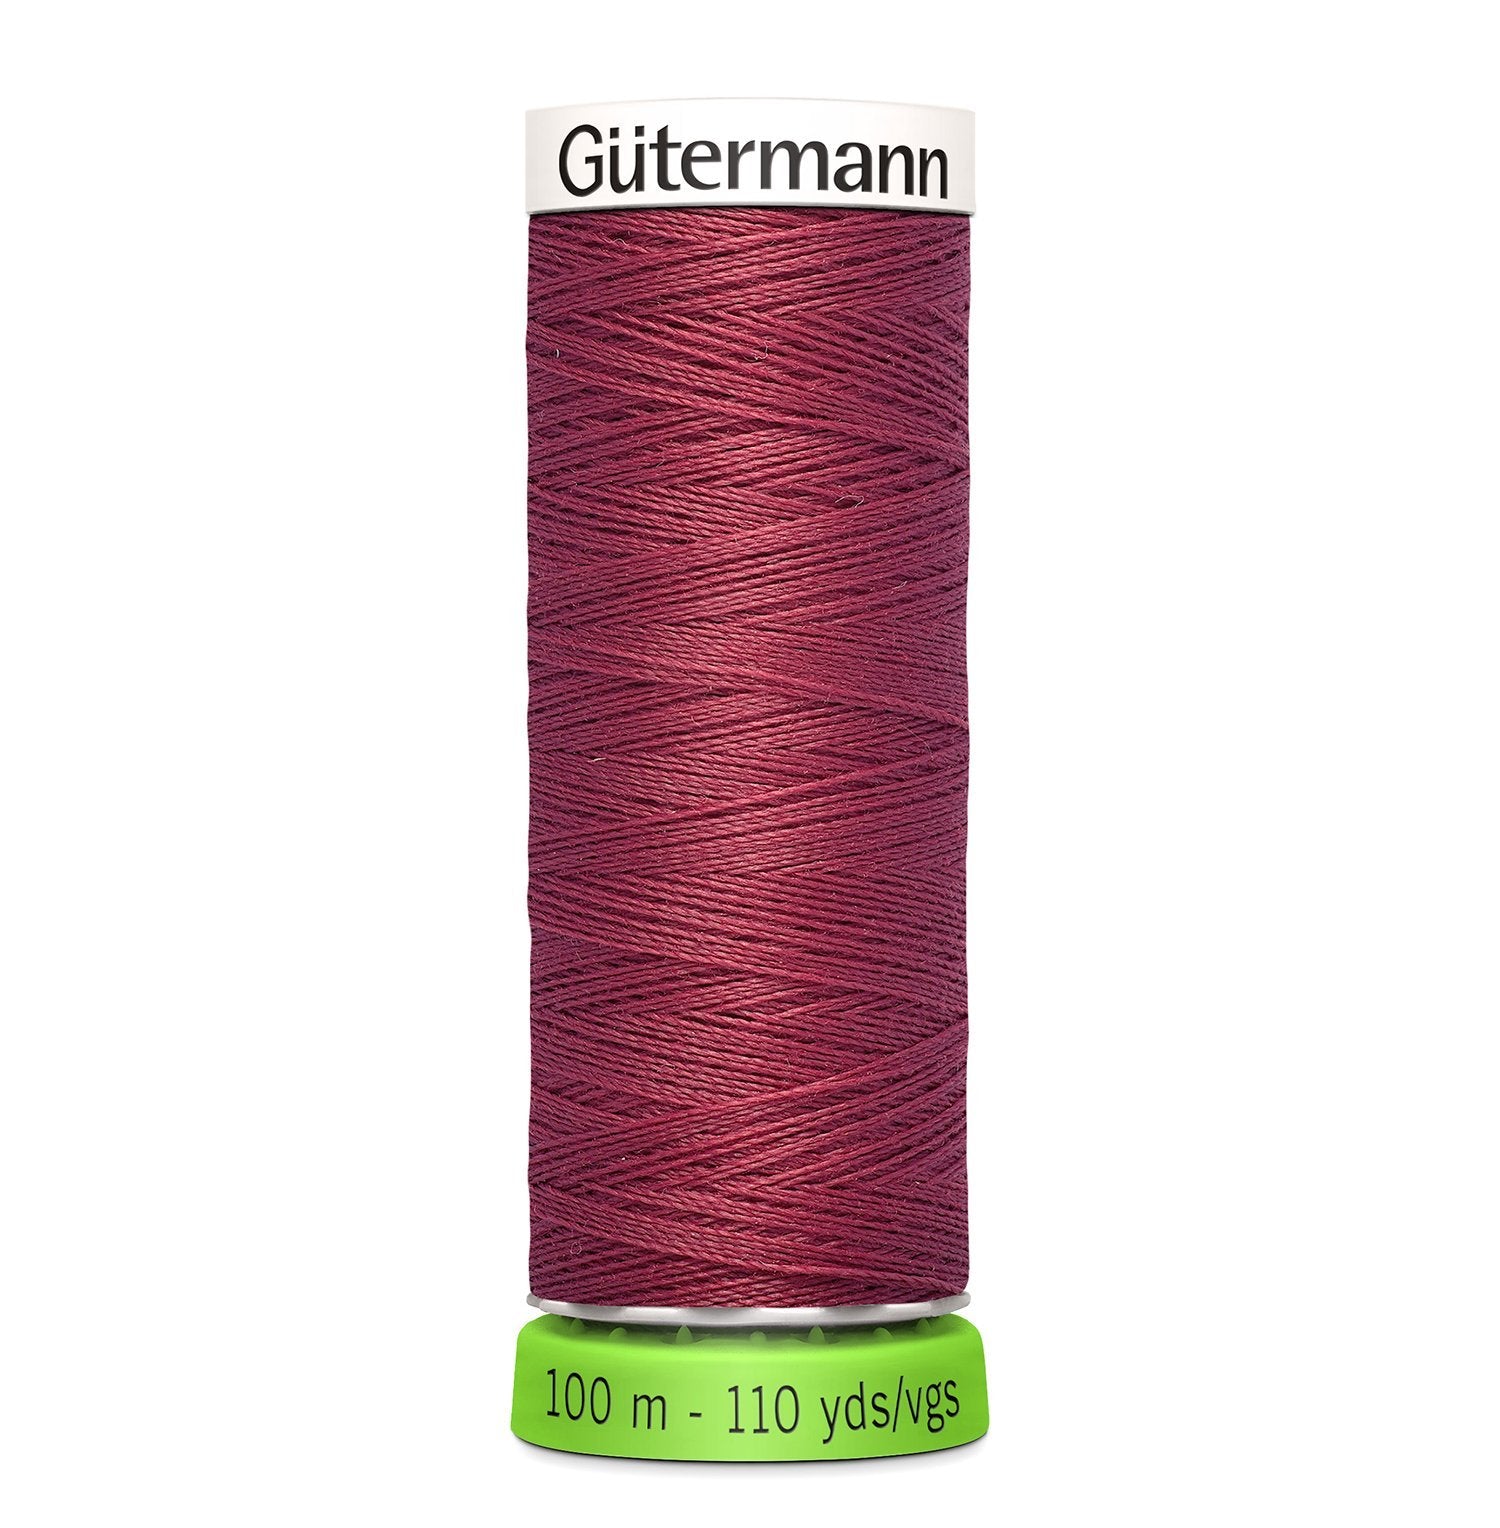 Gutermann Recycled Thread 100m, Colour 730 from Jaycotts Sewing Supplies